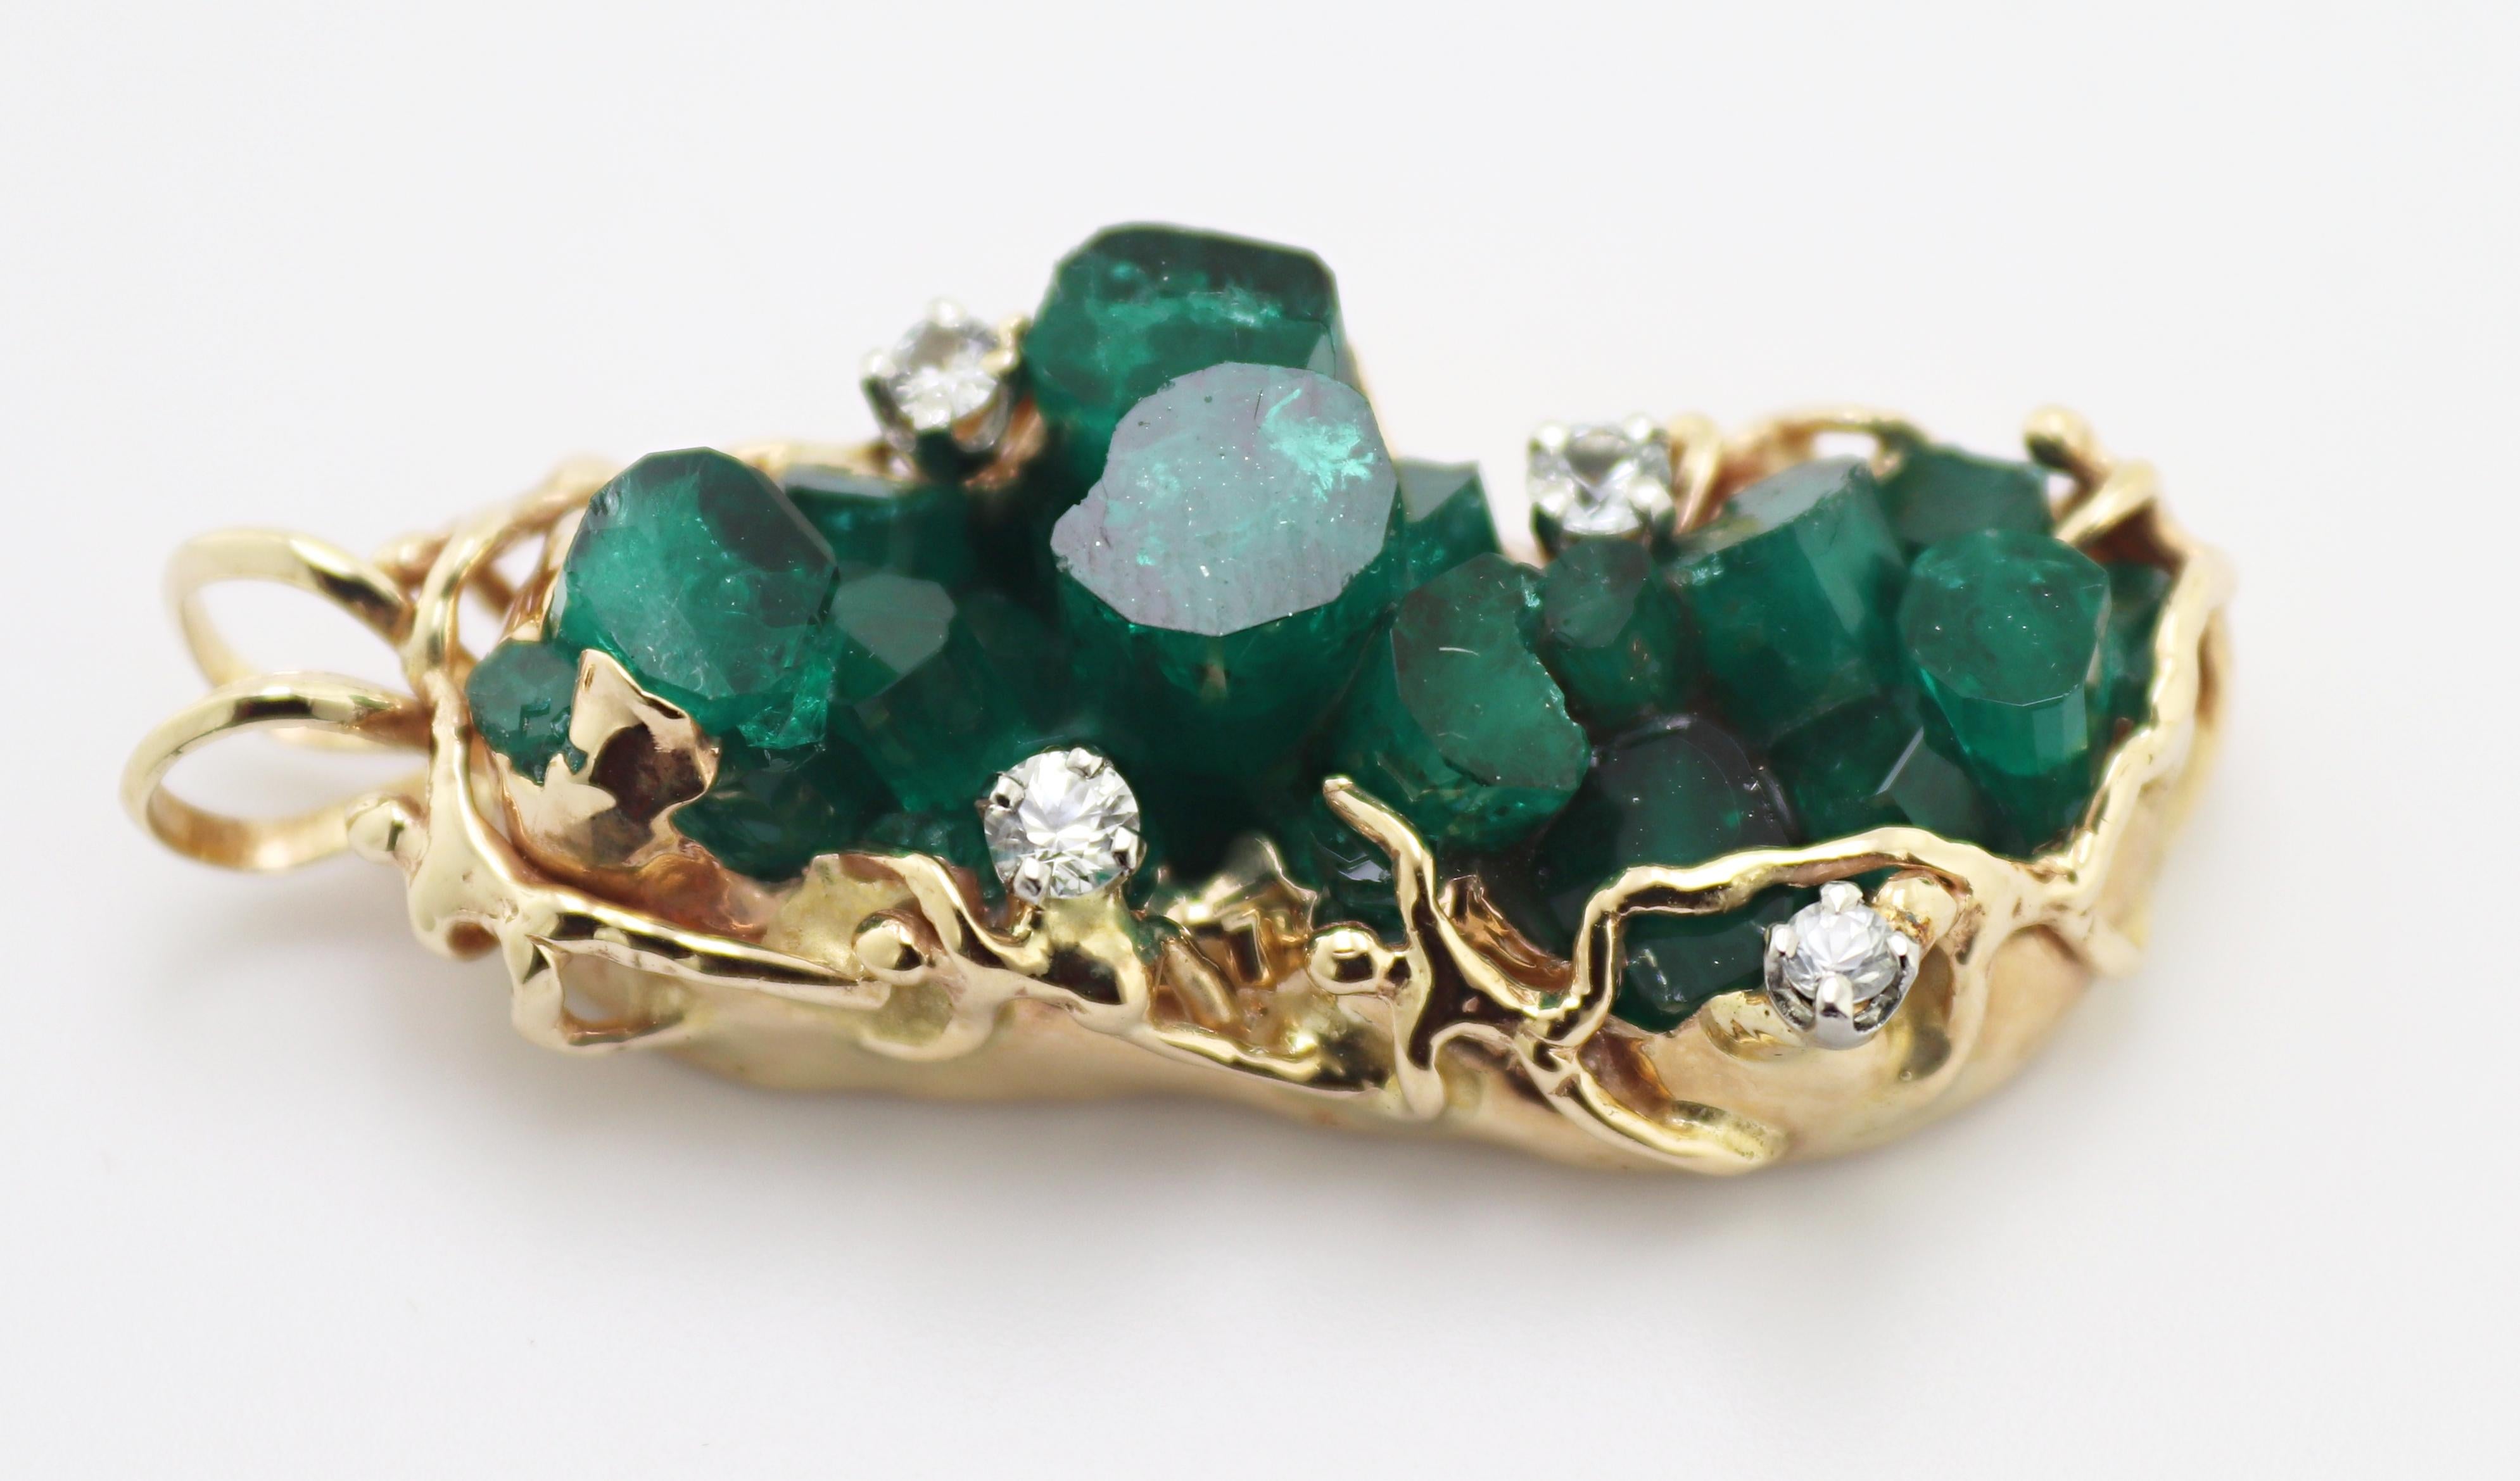 Synthetic Emerald Crystal Cluster, White Sapphire, Yellow Gold Ring, Earrings In Excellent Condition For Sale In Pleasant Hill, CA